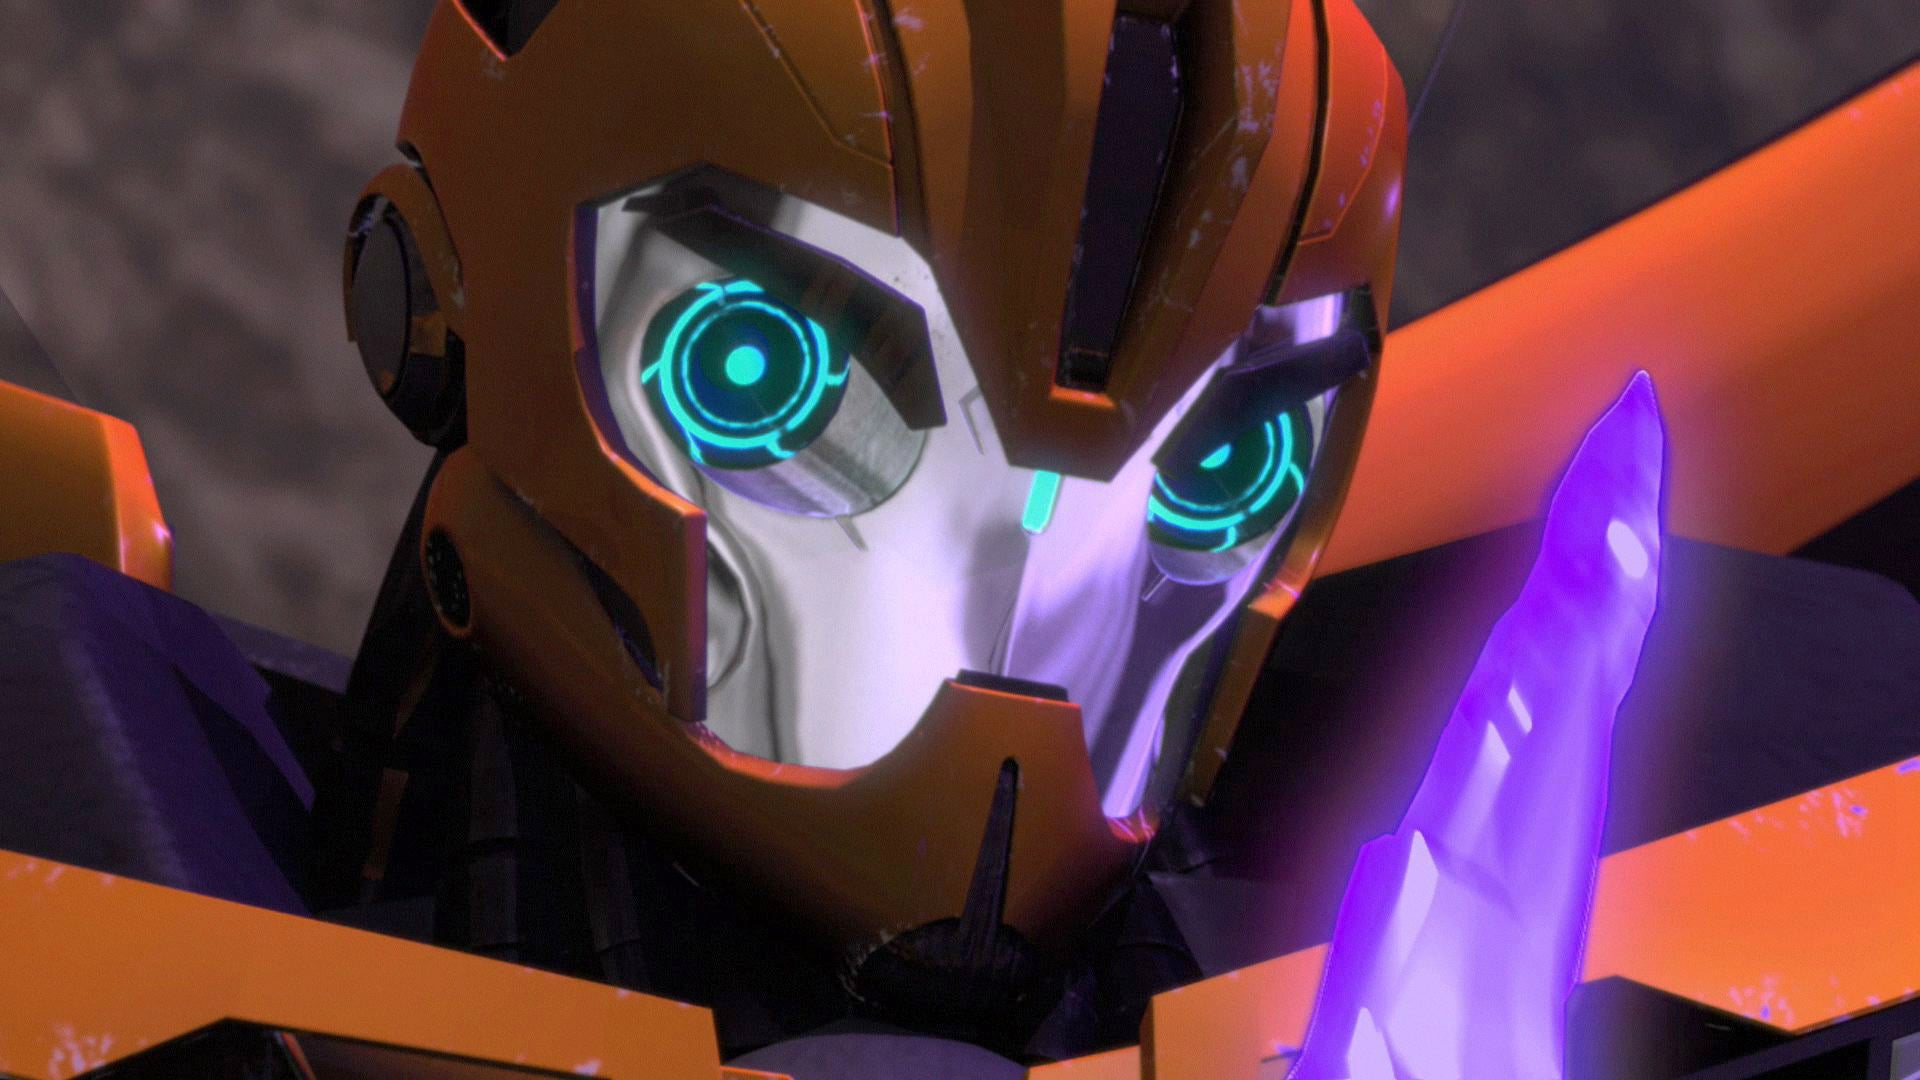 Transformers Prime Episodio 14 - Out of his head HD - Vídeo